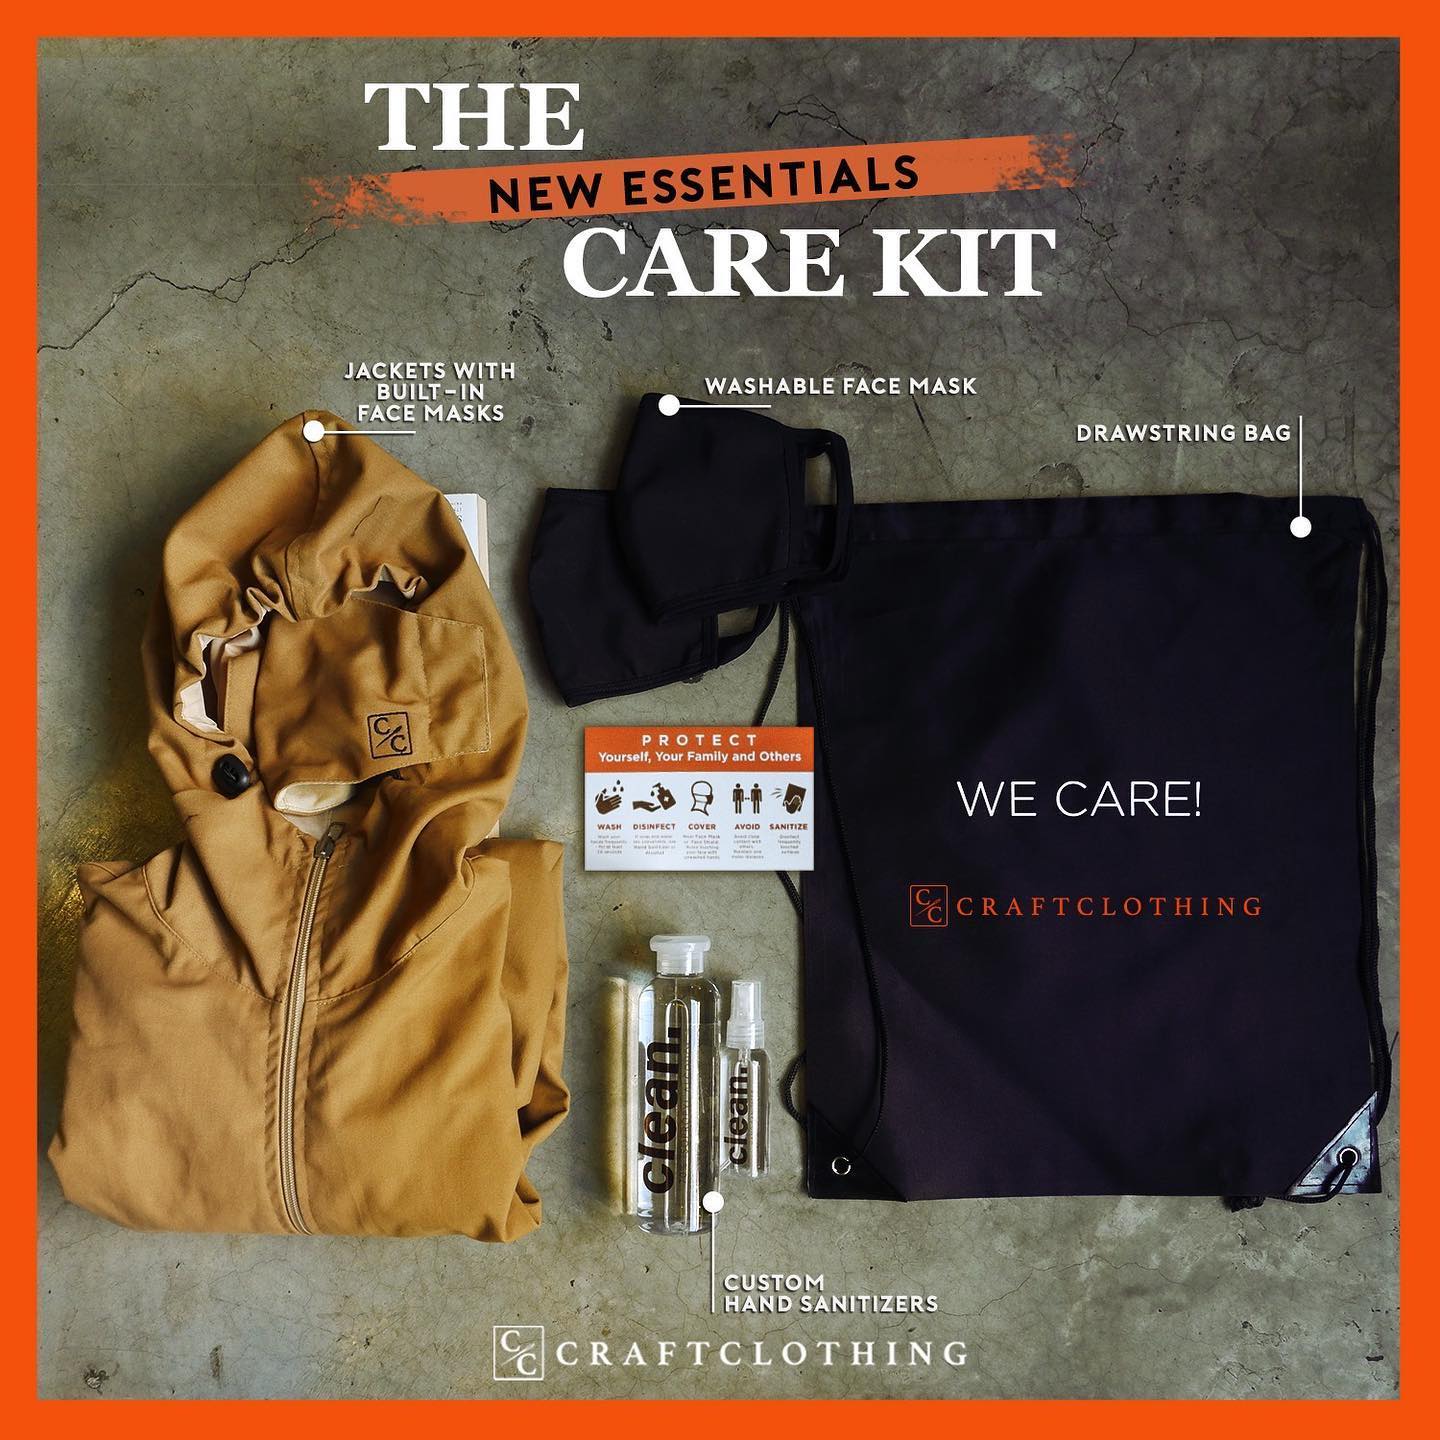 THE NEW ESSENTIALS CARE KIT